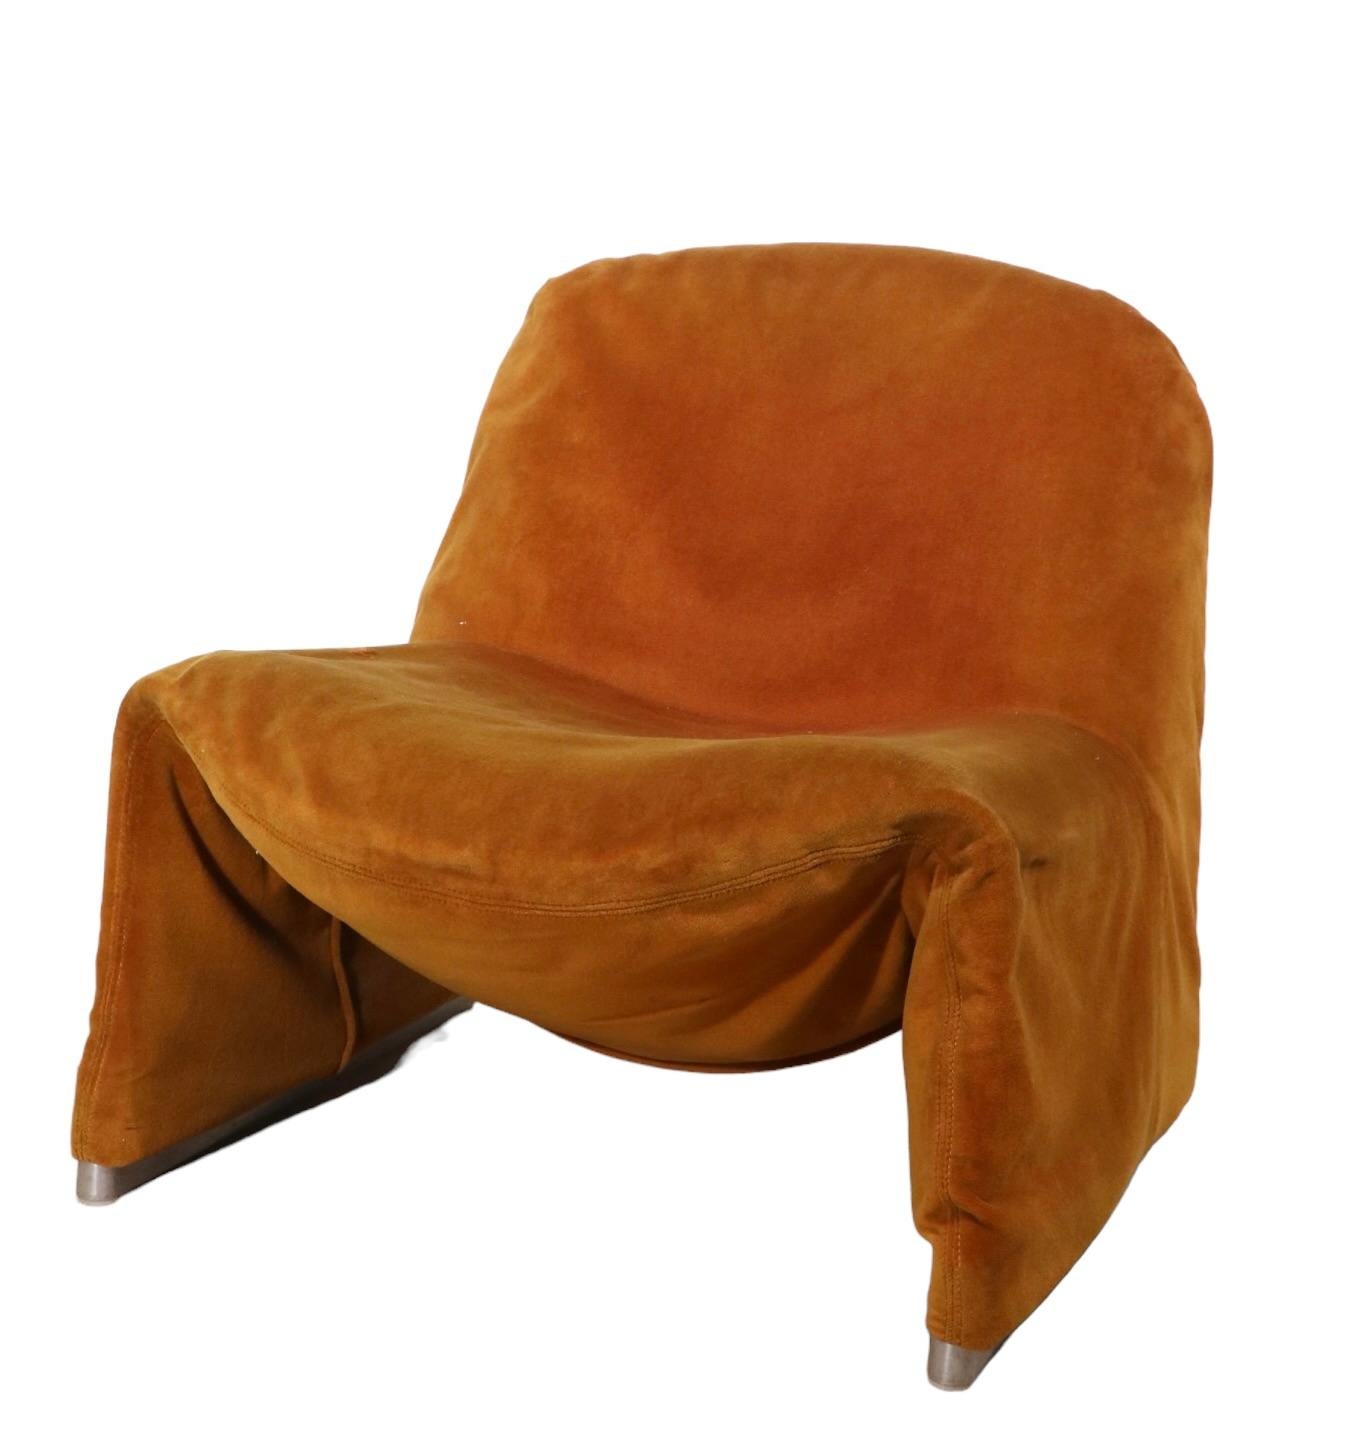 Late 20th Century Alky Chair by Giancarlo Piretti for Castelli Made in Italy, C 1970's